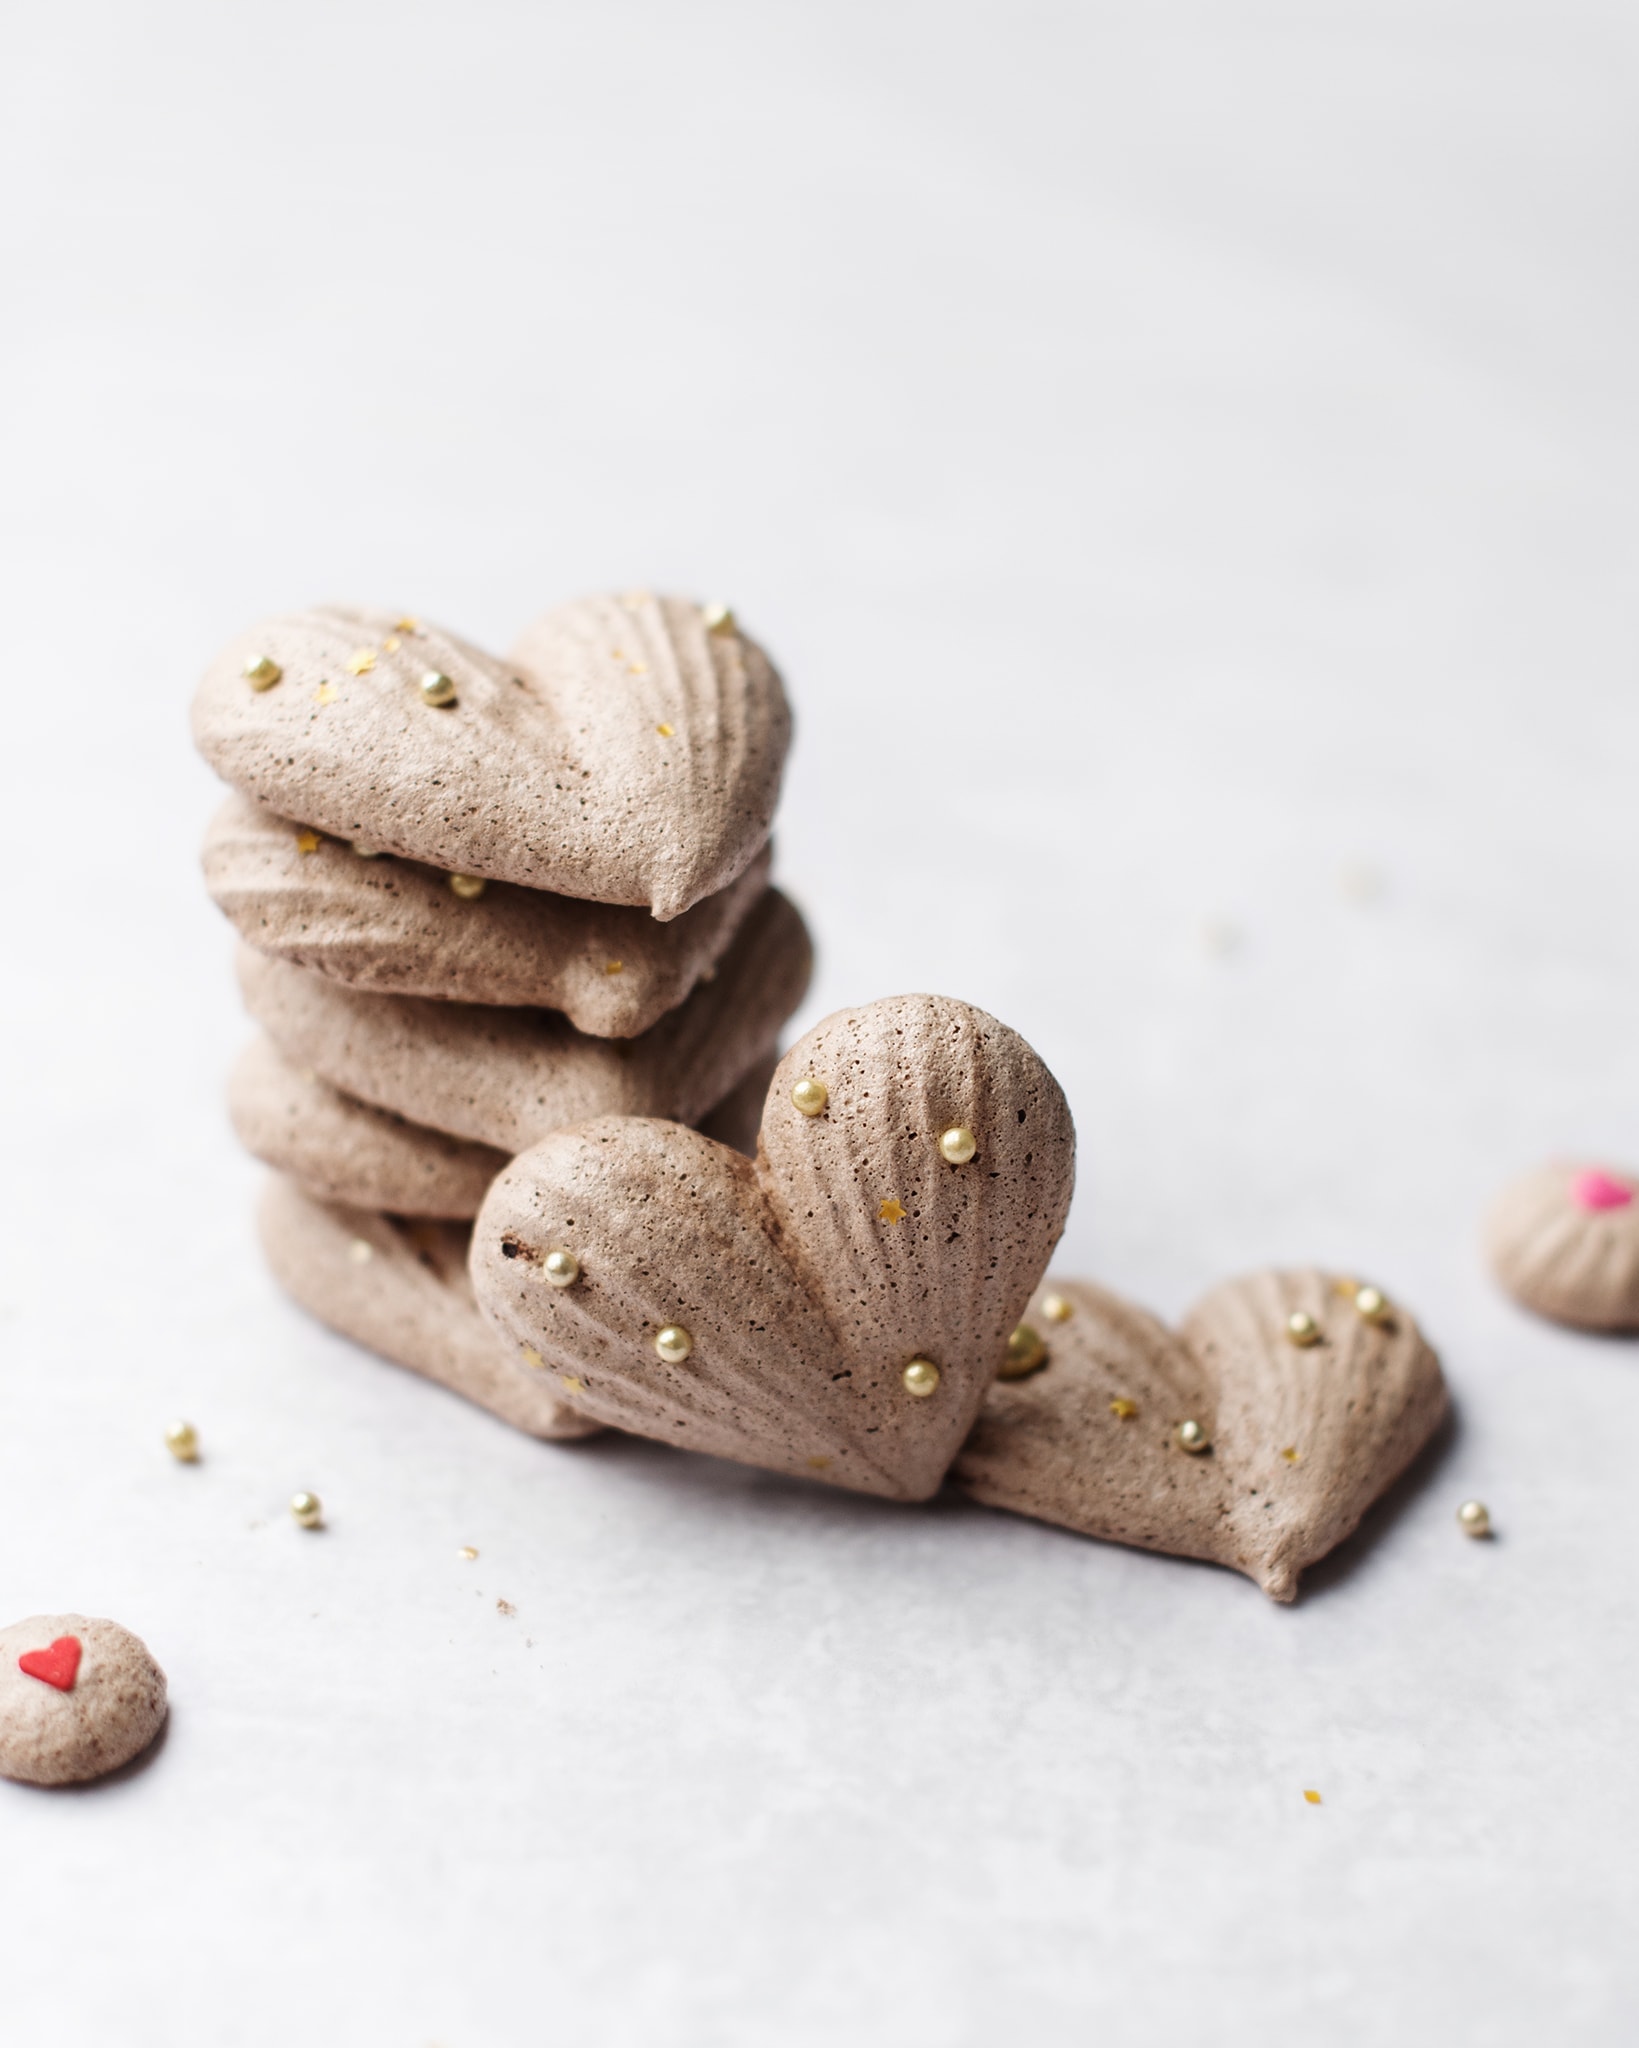 A stack of heart-shaped chocolate meringues with gold sprinkles